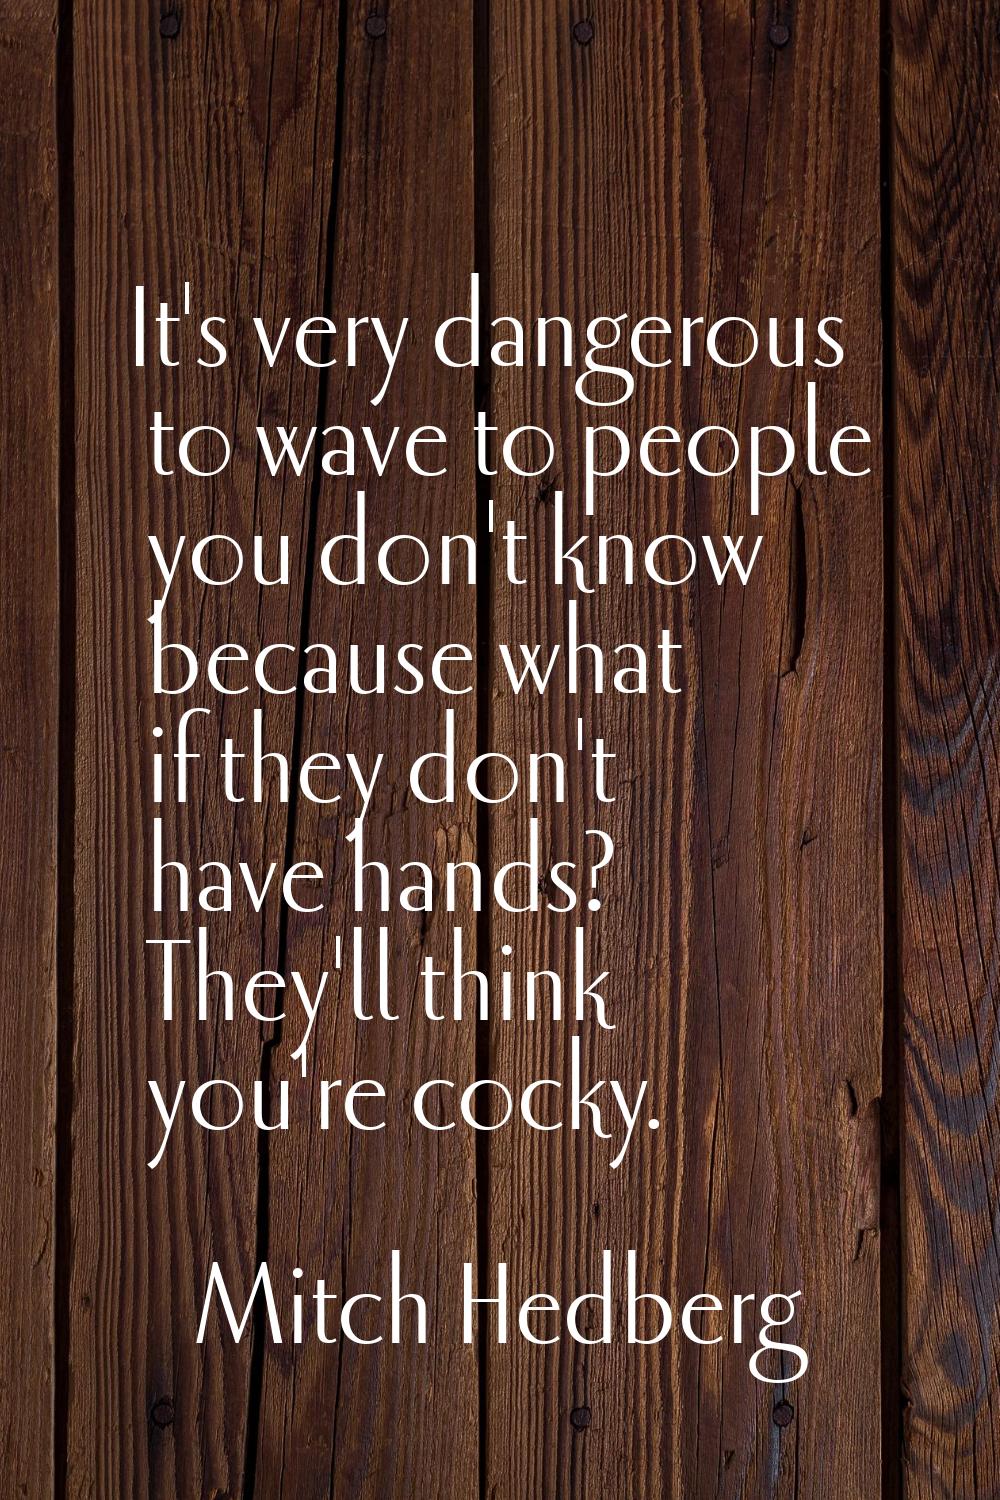 It's very dangerous to wave to people you don't know because what if they don't have hands? They'll